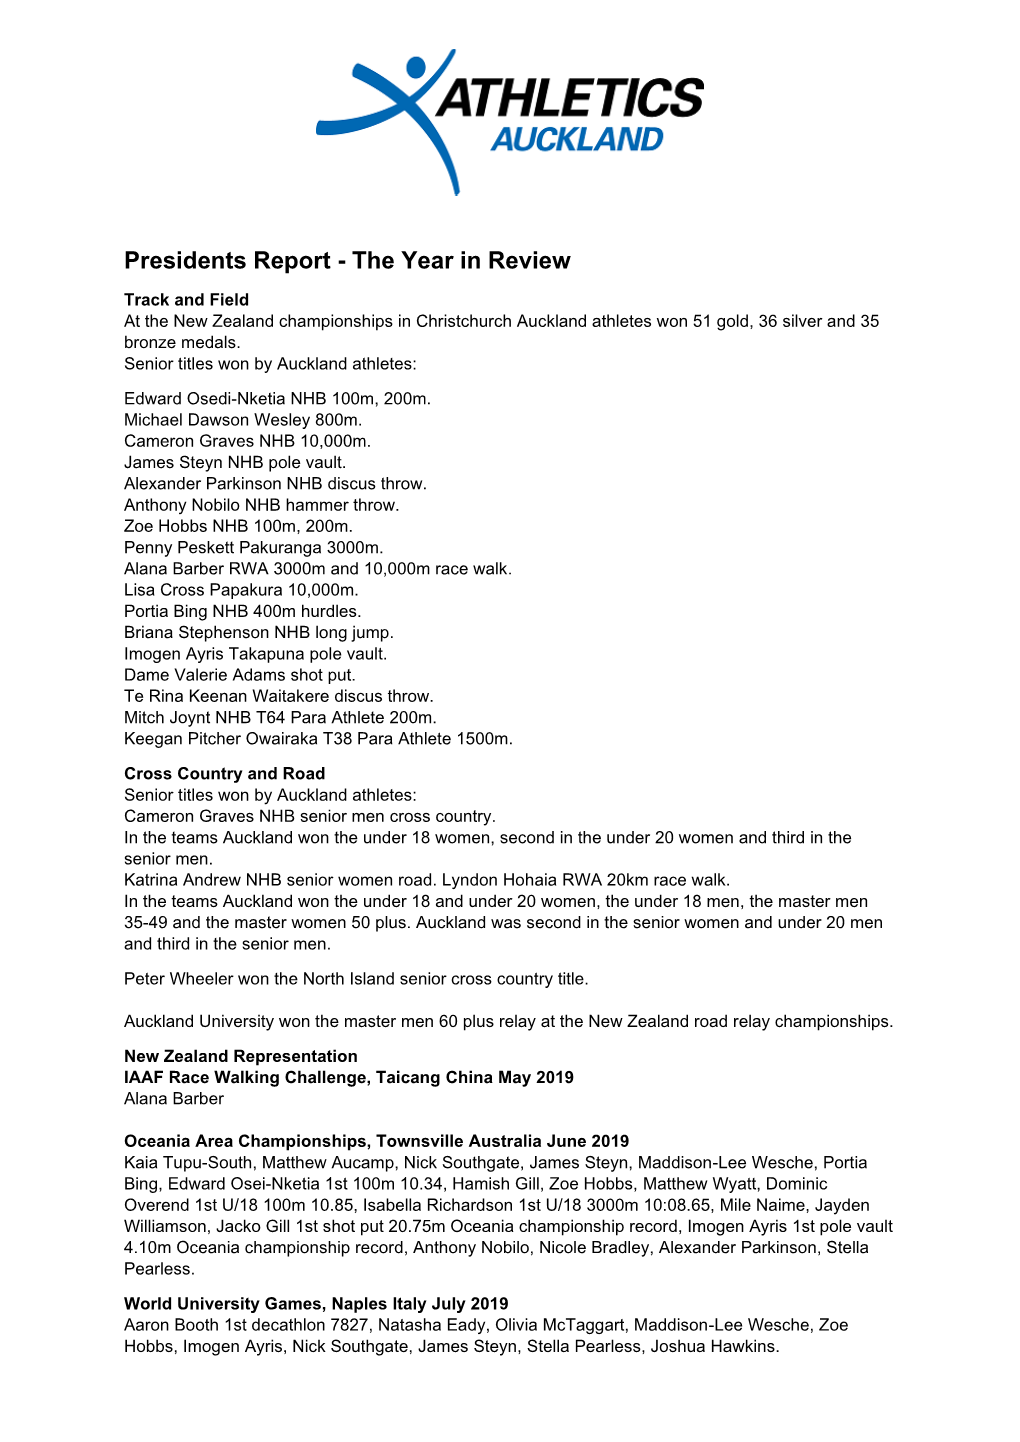 Presidents Report - the Year in Review